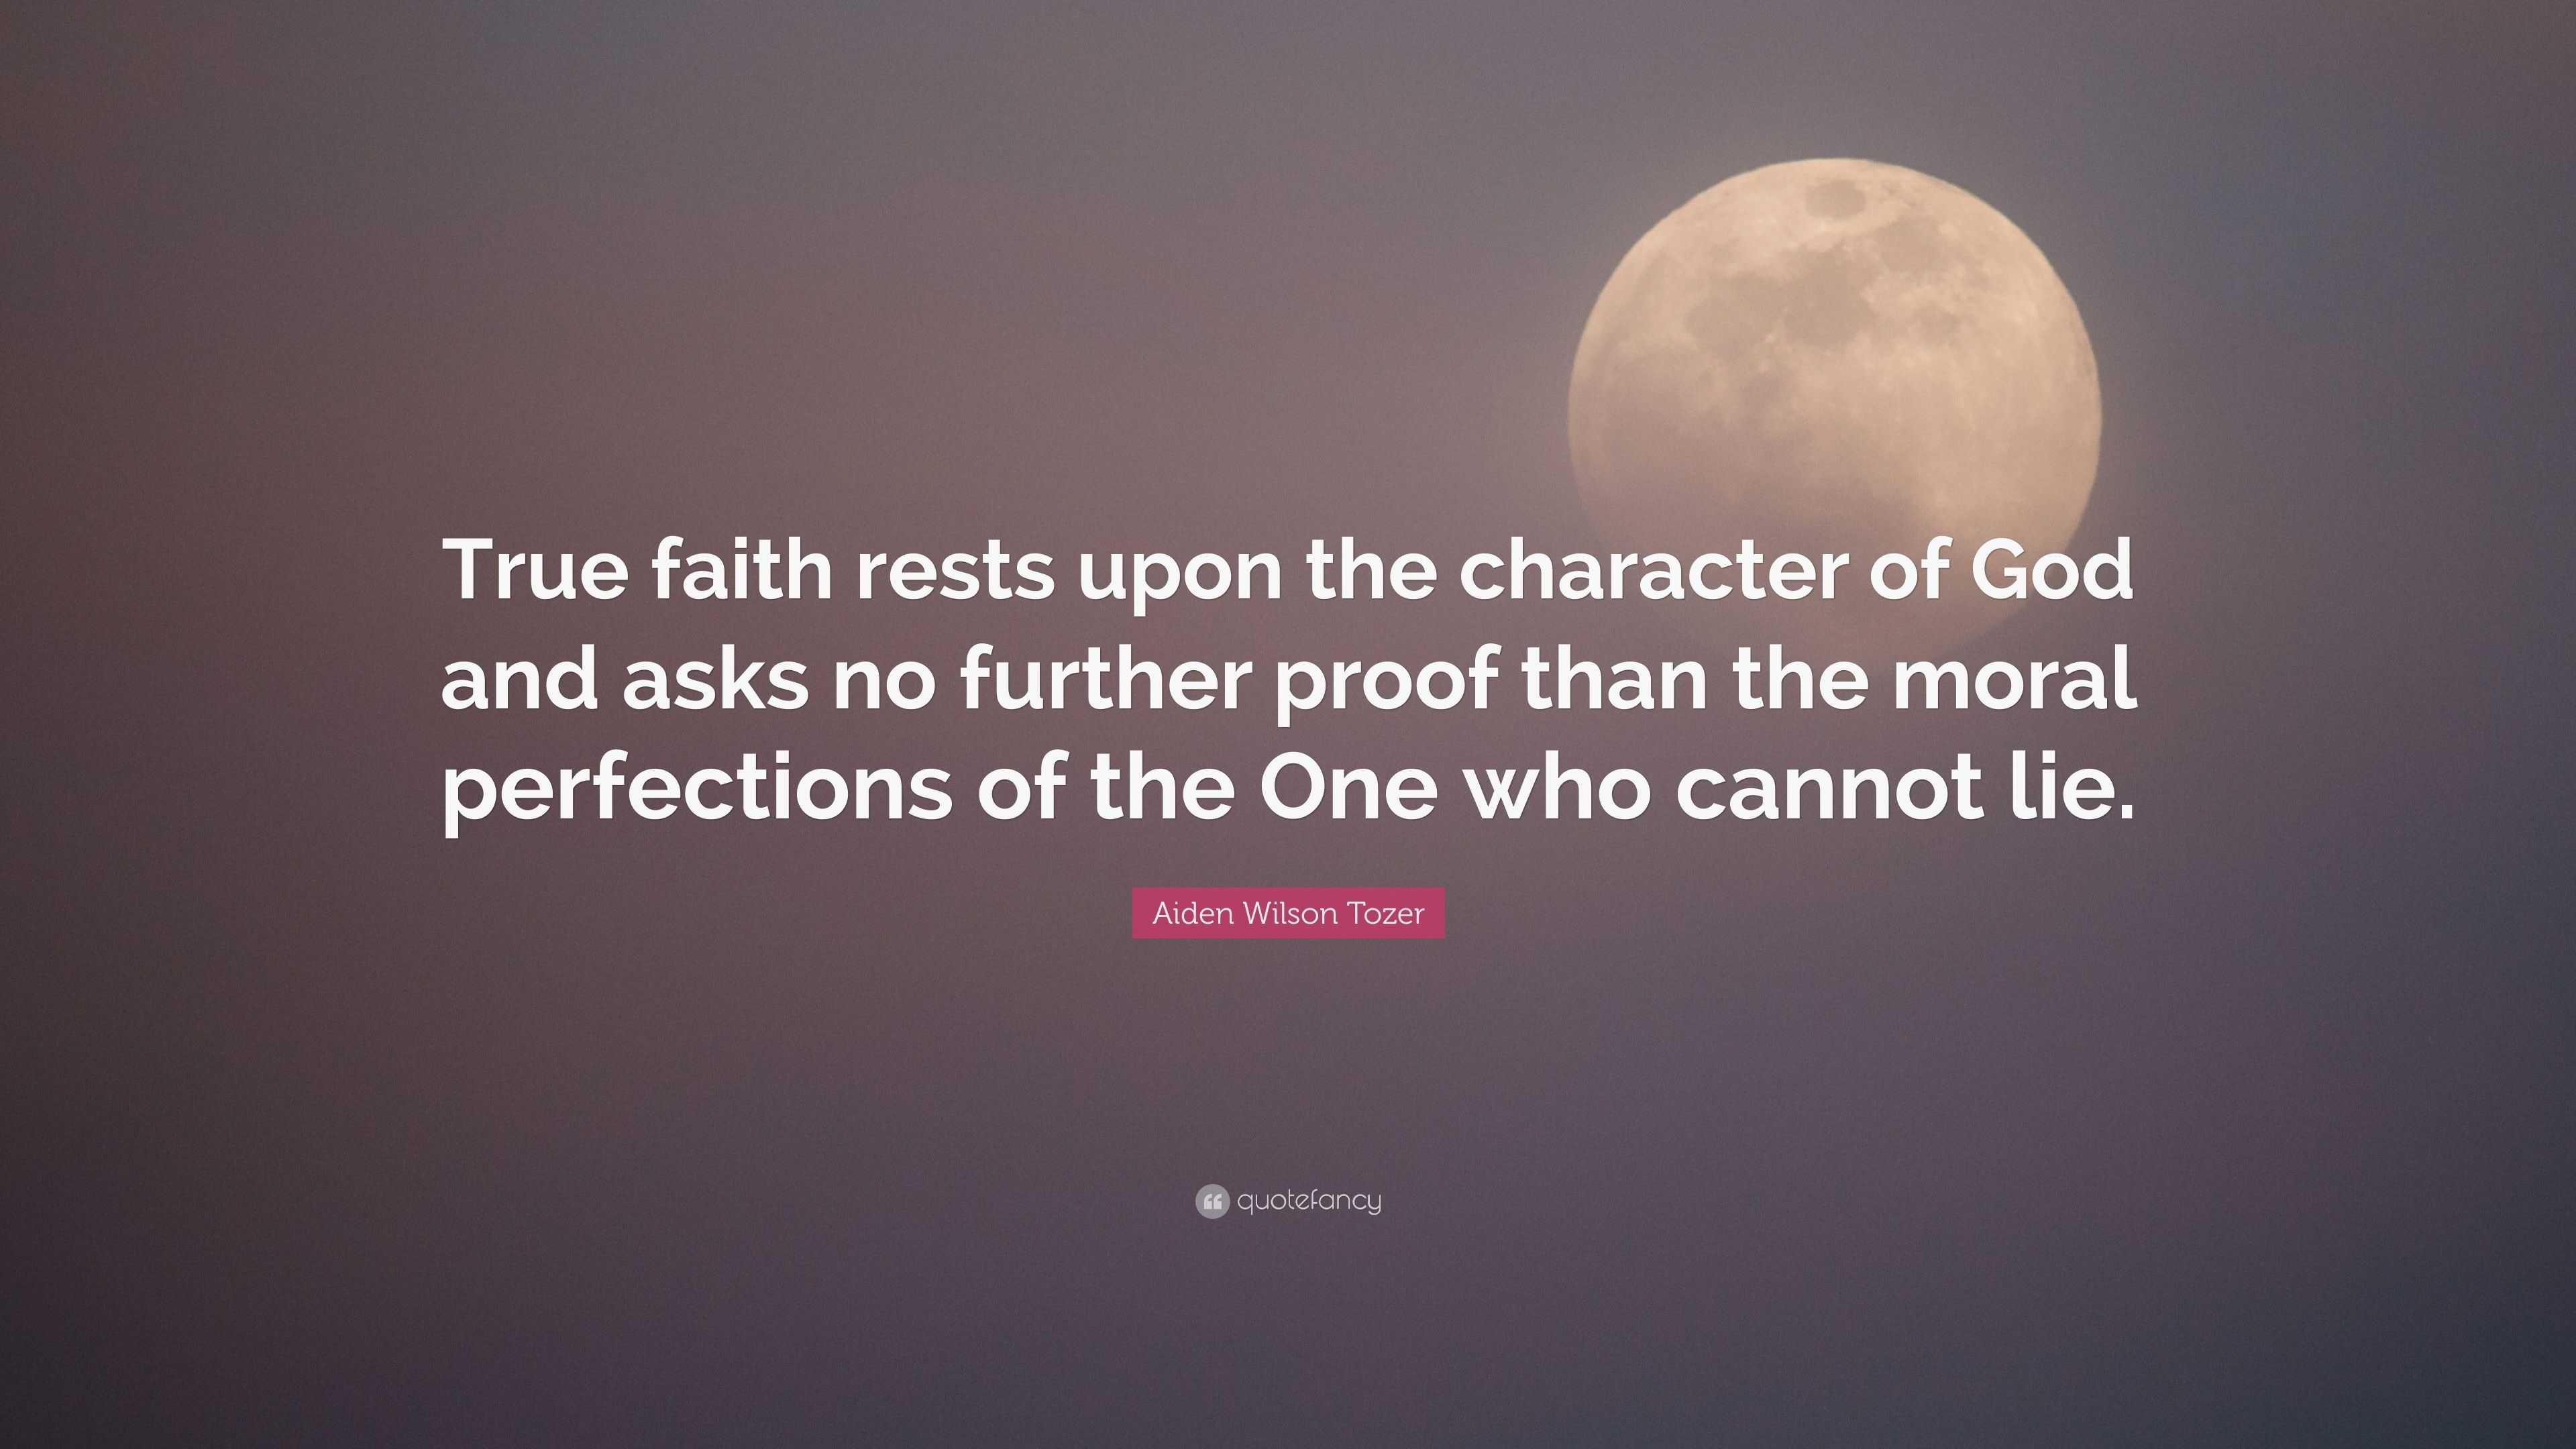 Aiden Wilson Tozer Quote: “True faith rests upon the character of God ...